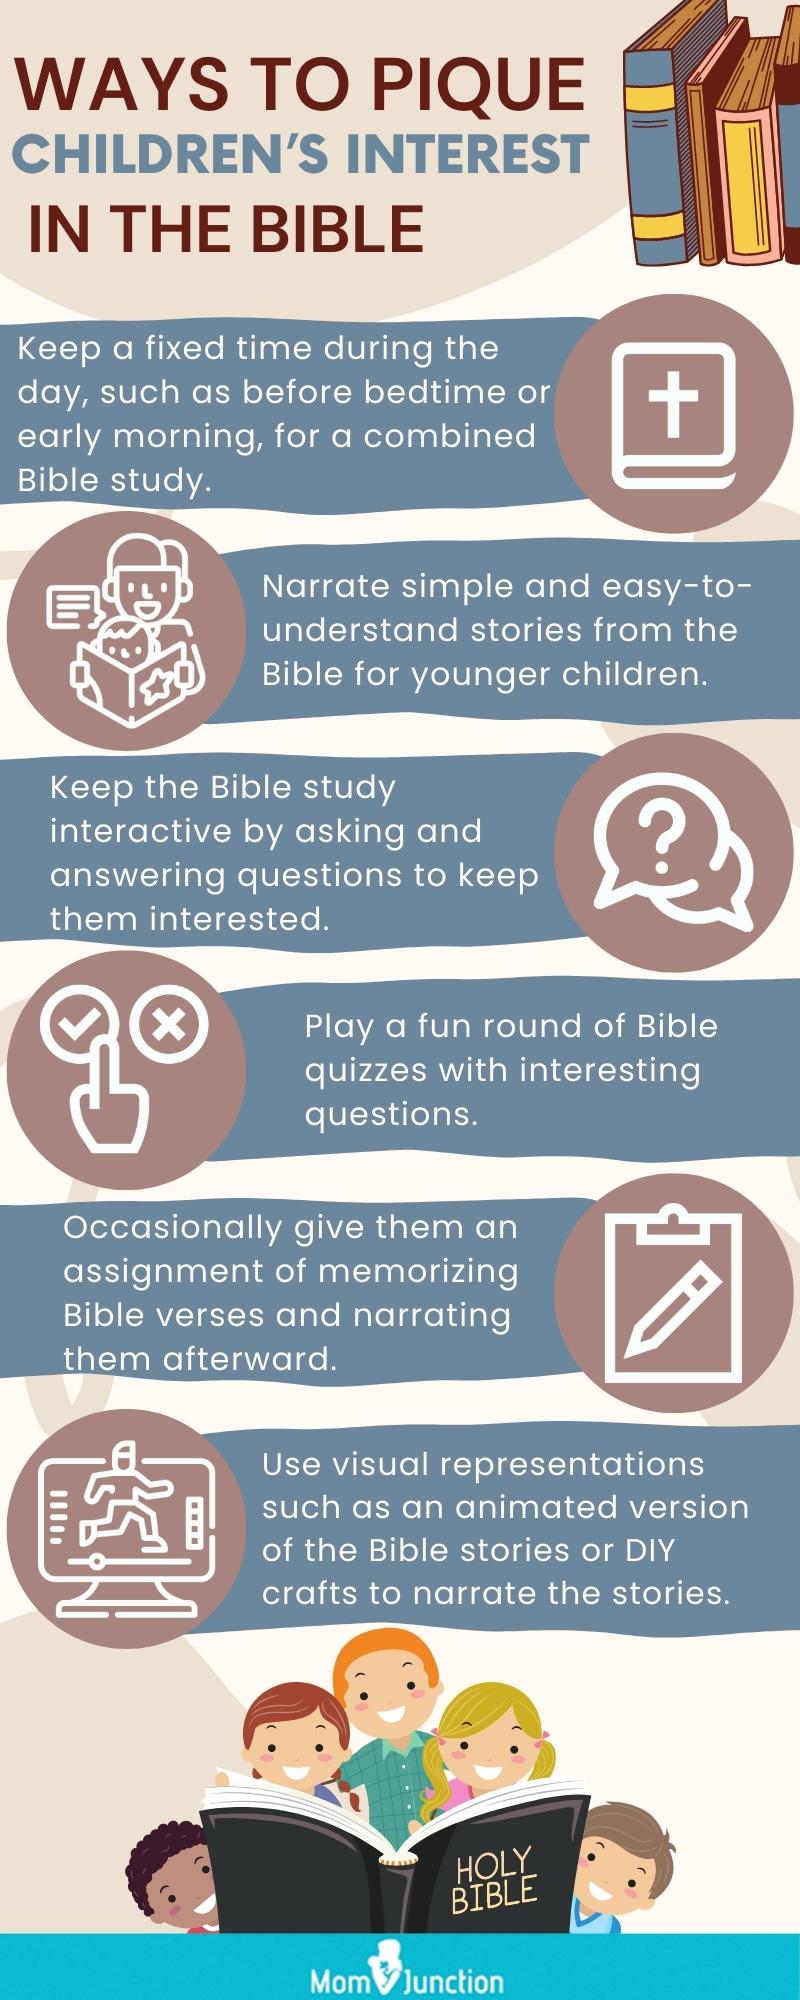 ways to pique childrens interest in the bible (infographic)